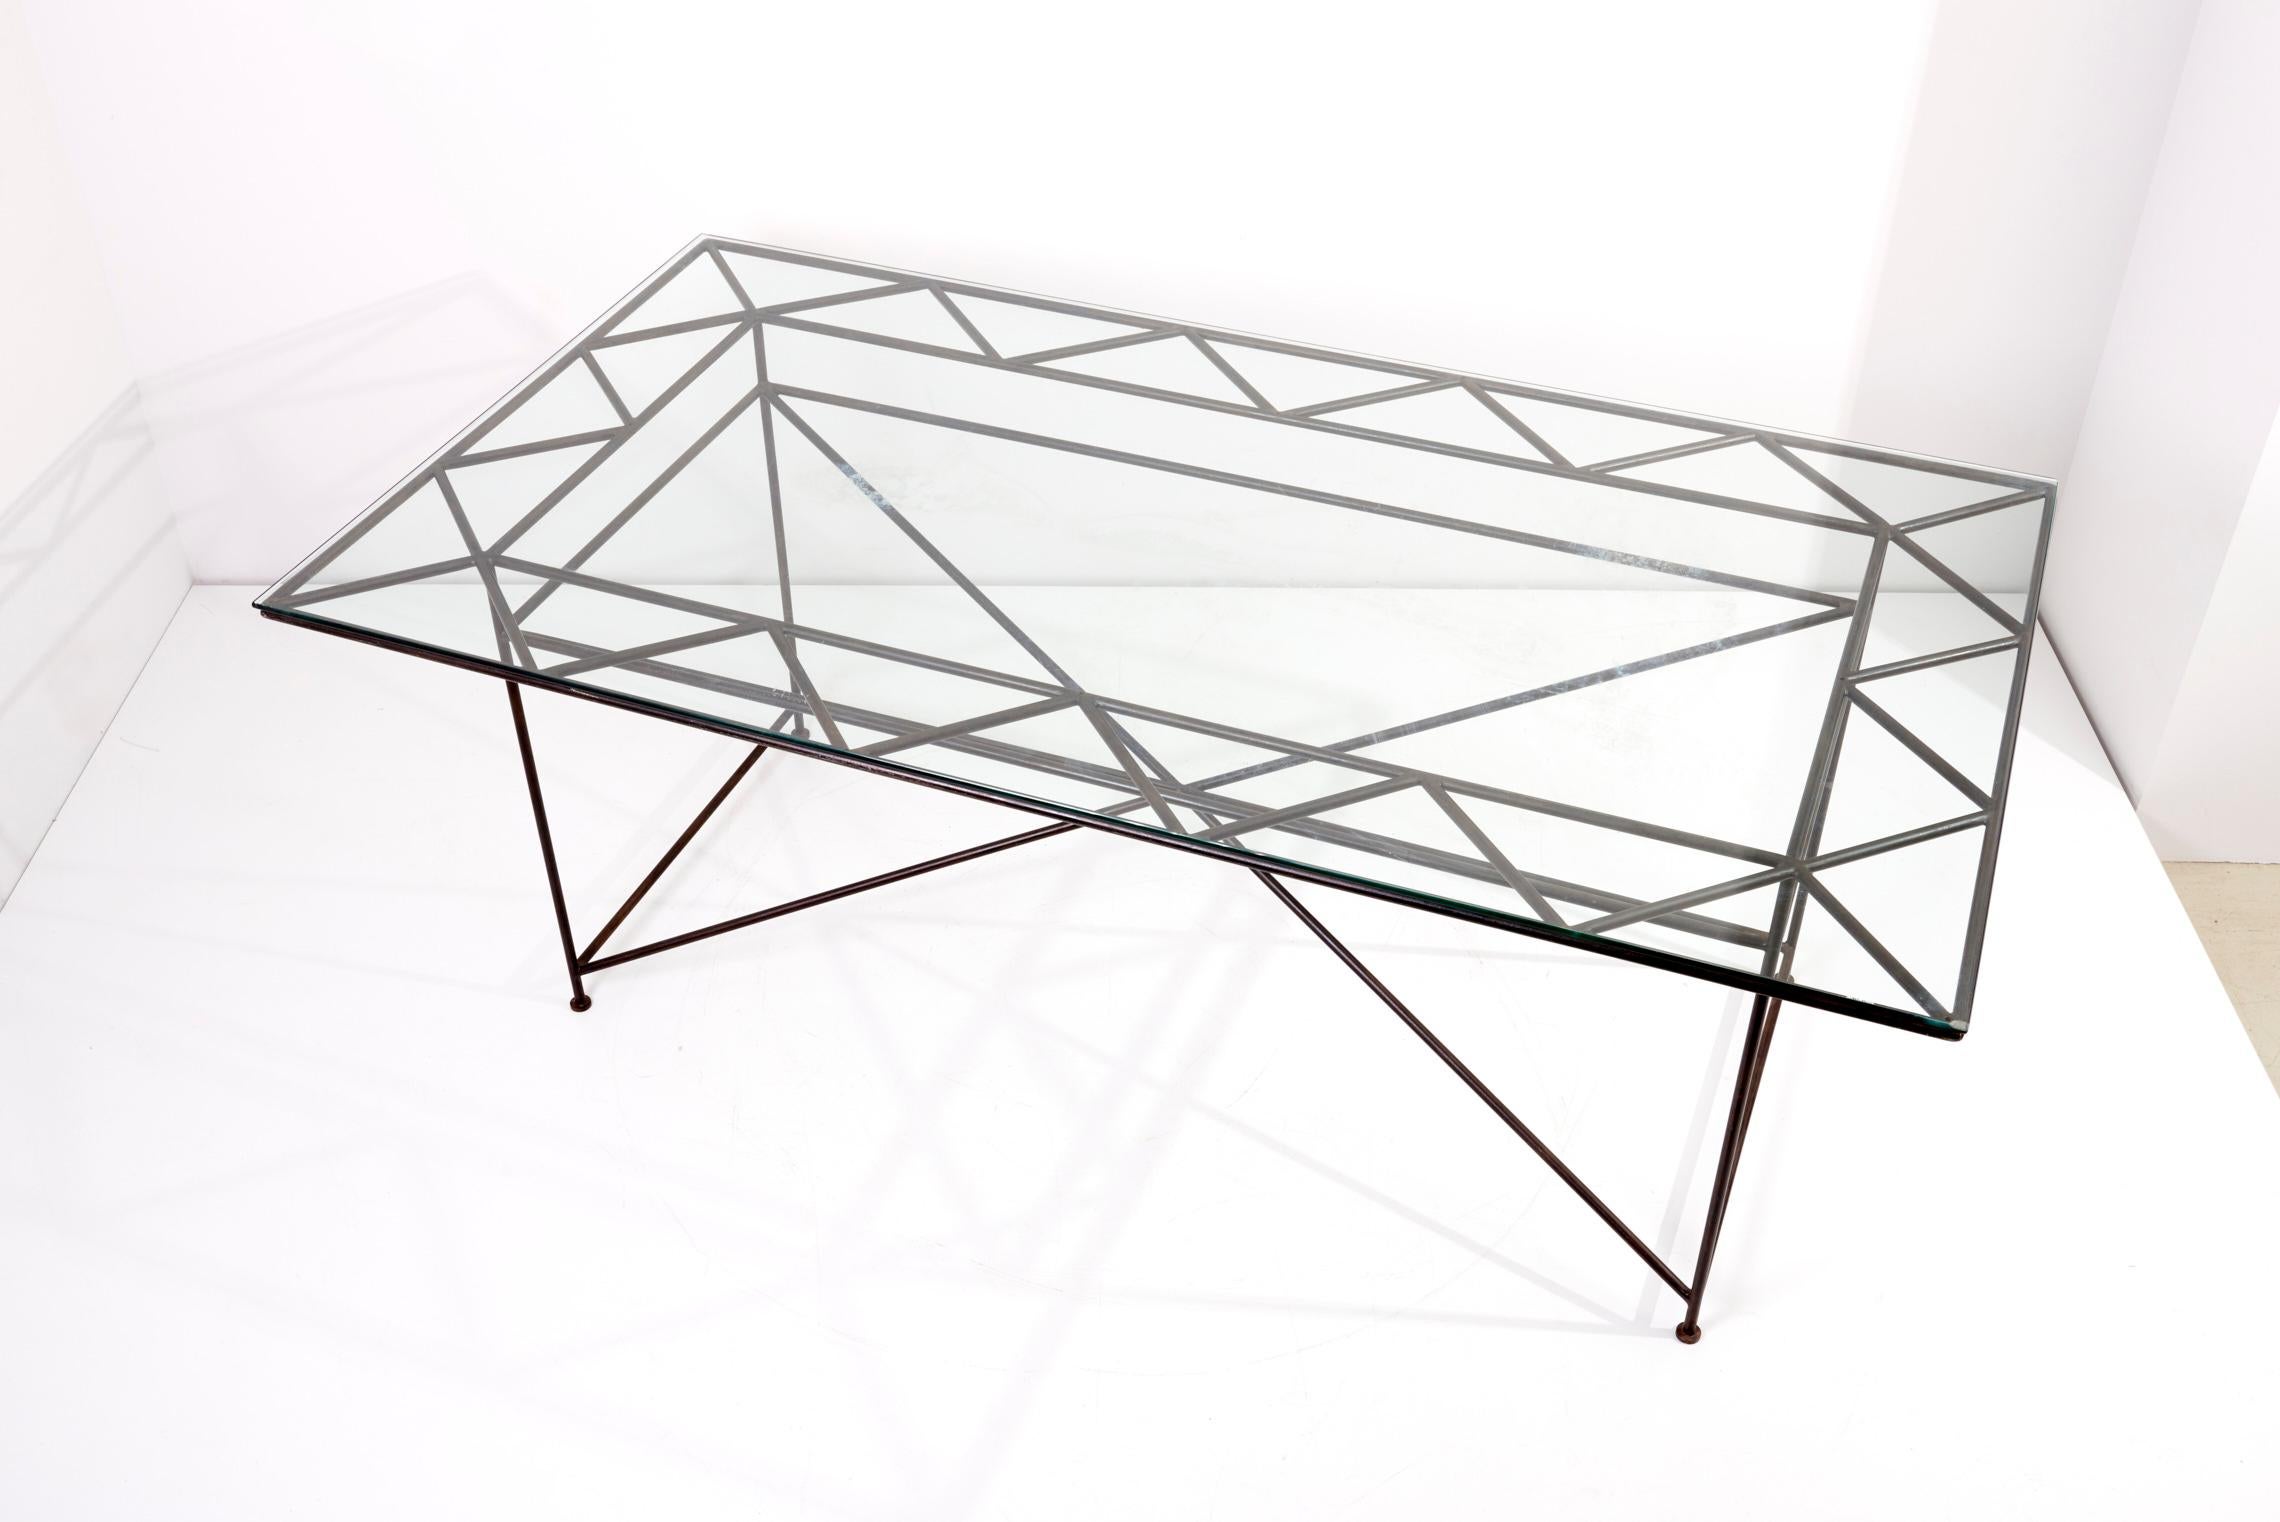 Dining table in iron with glass top by Giovanni Ferrabini, 1970s.